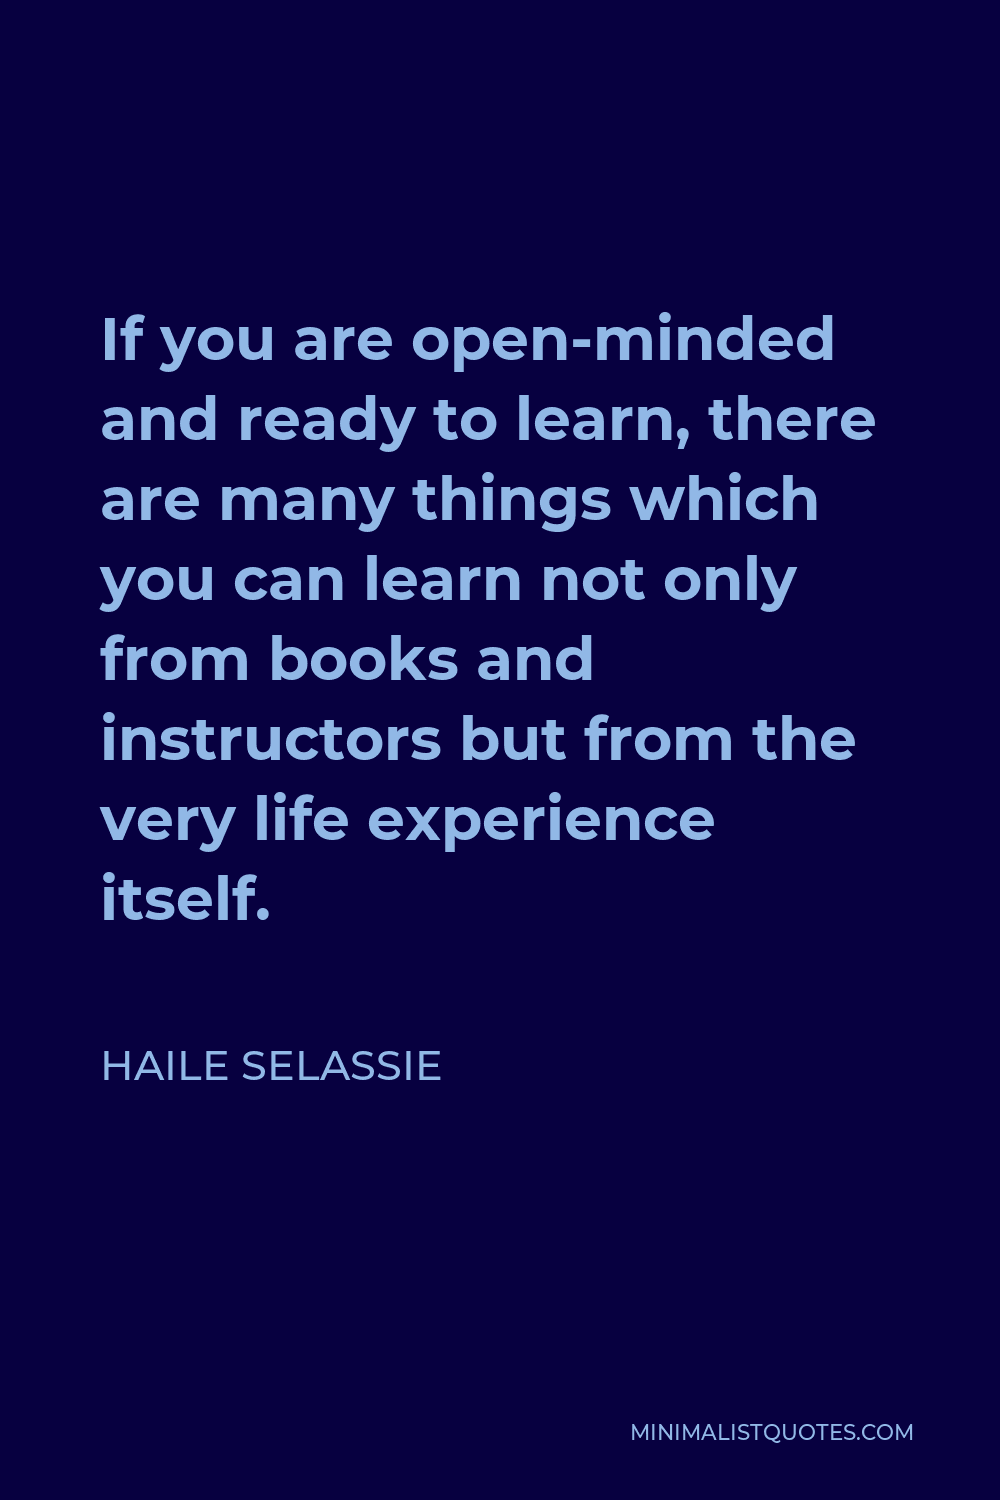 Haile Selassie Quote - If you are open-minded and ready to learn, there are many things which you can learn not only from books and instructors but from the very life experience itself.